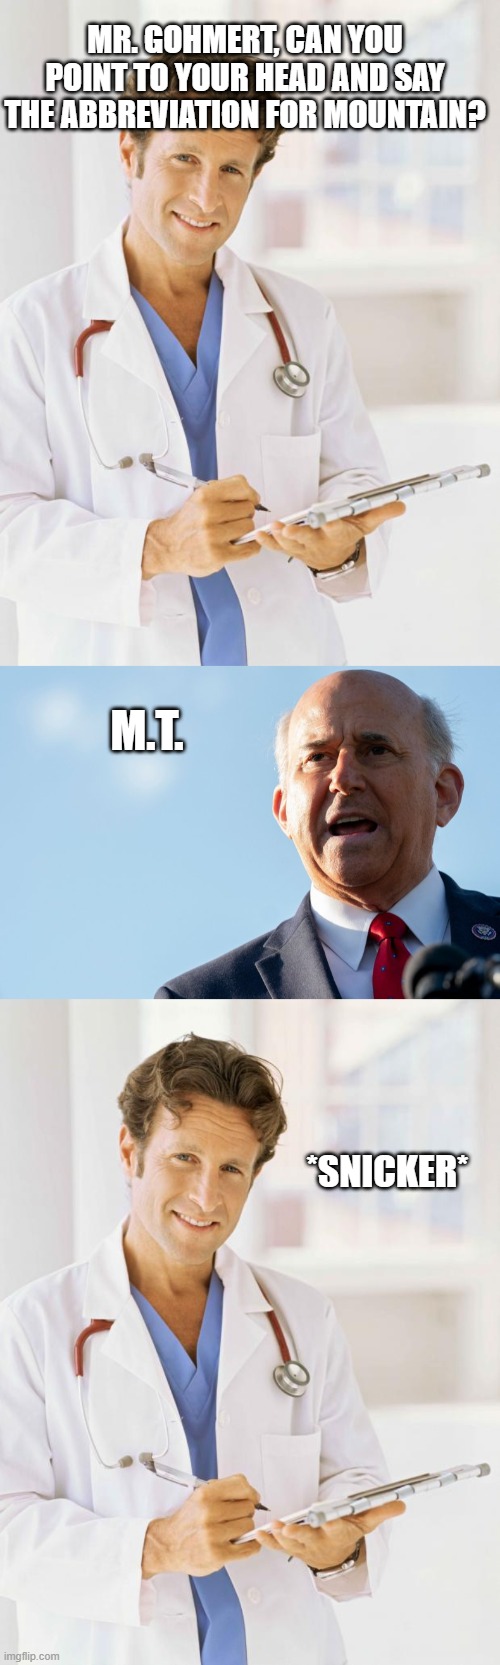 MR. GOHMERT, CAN YOU POINT TO YOUR HEAD AND SAY THE ABBREVIATION FOR MOUNTAIN? M.T. *SNICKER* | image tagged in doctor | made w/ Imgflip meme maker